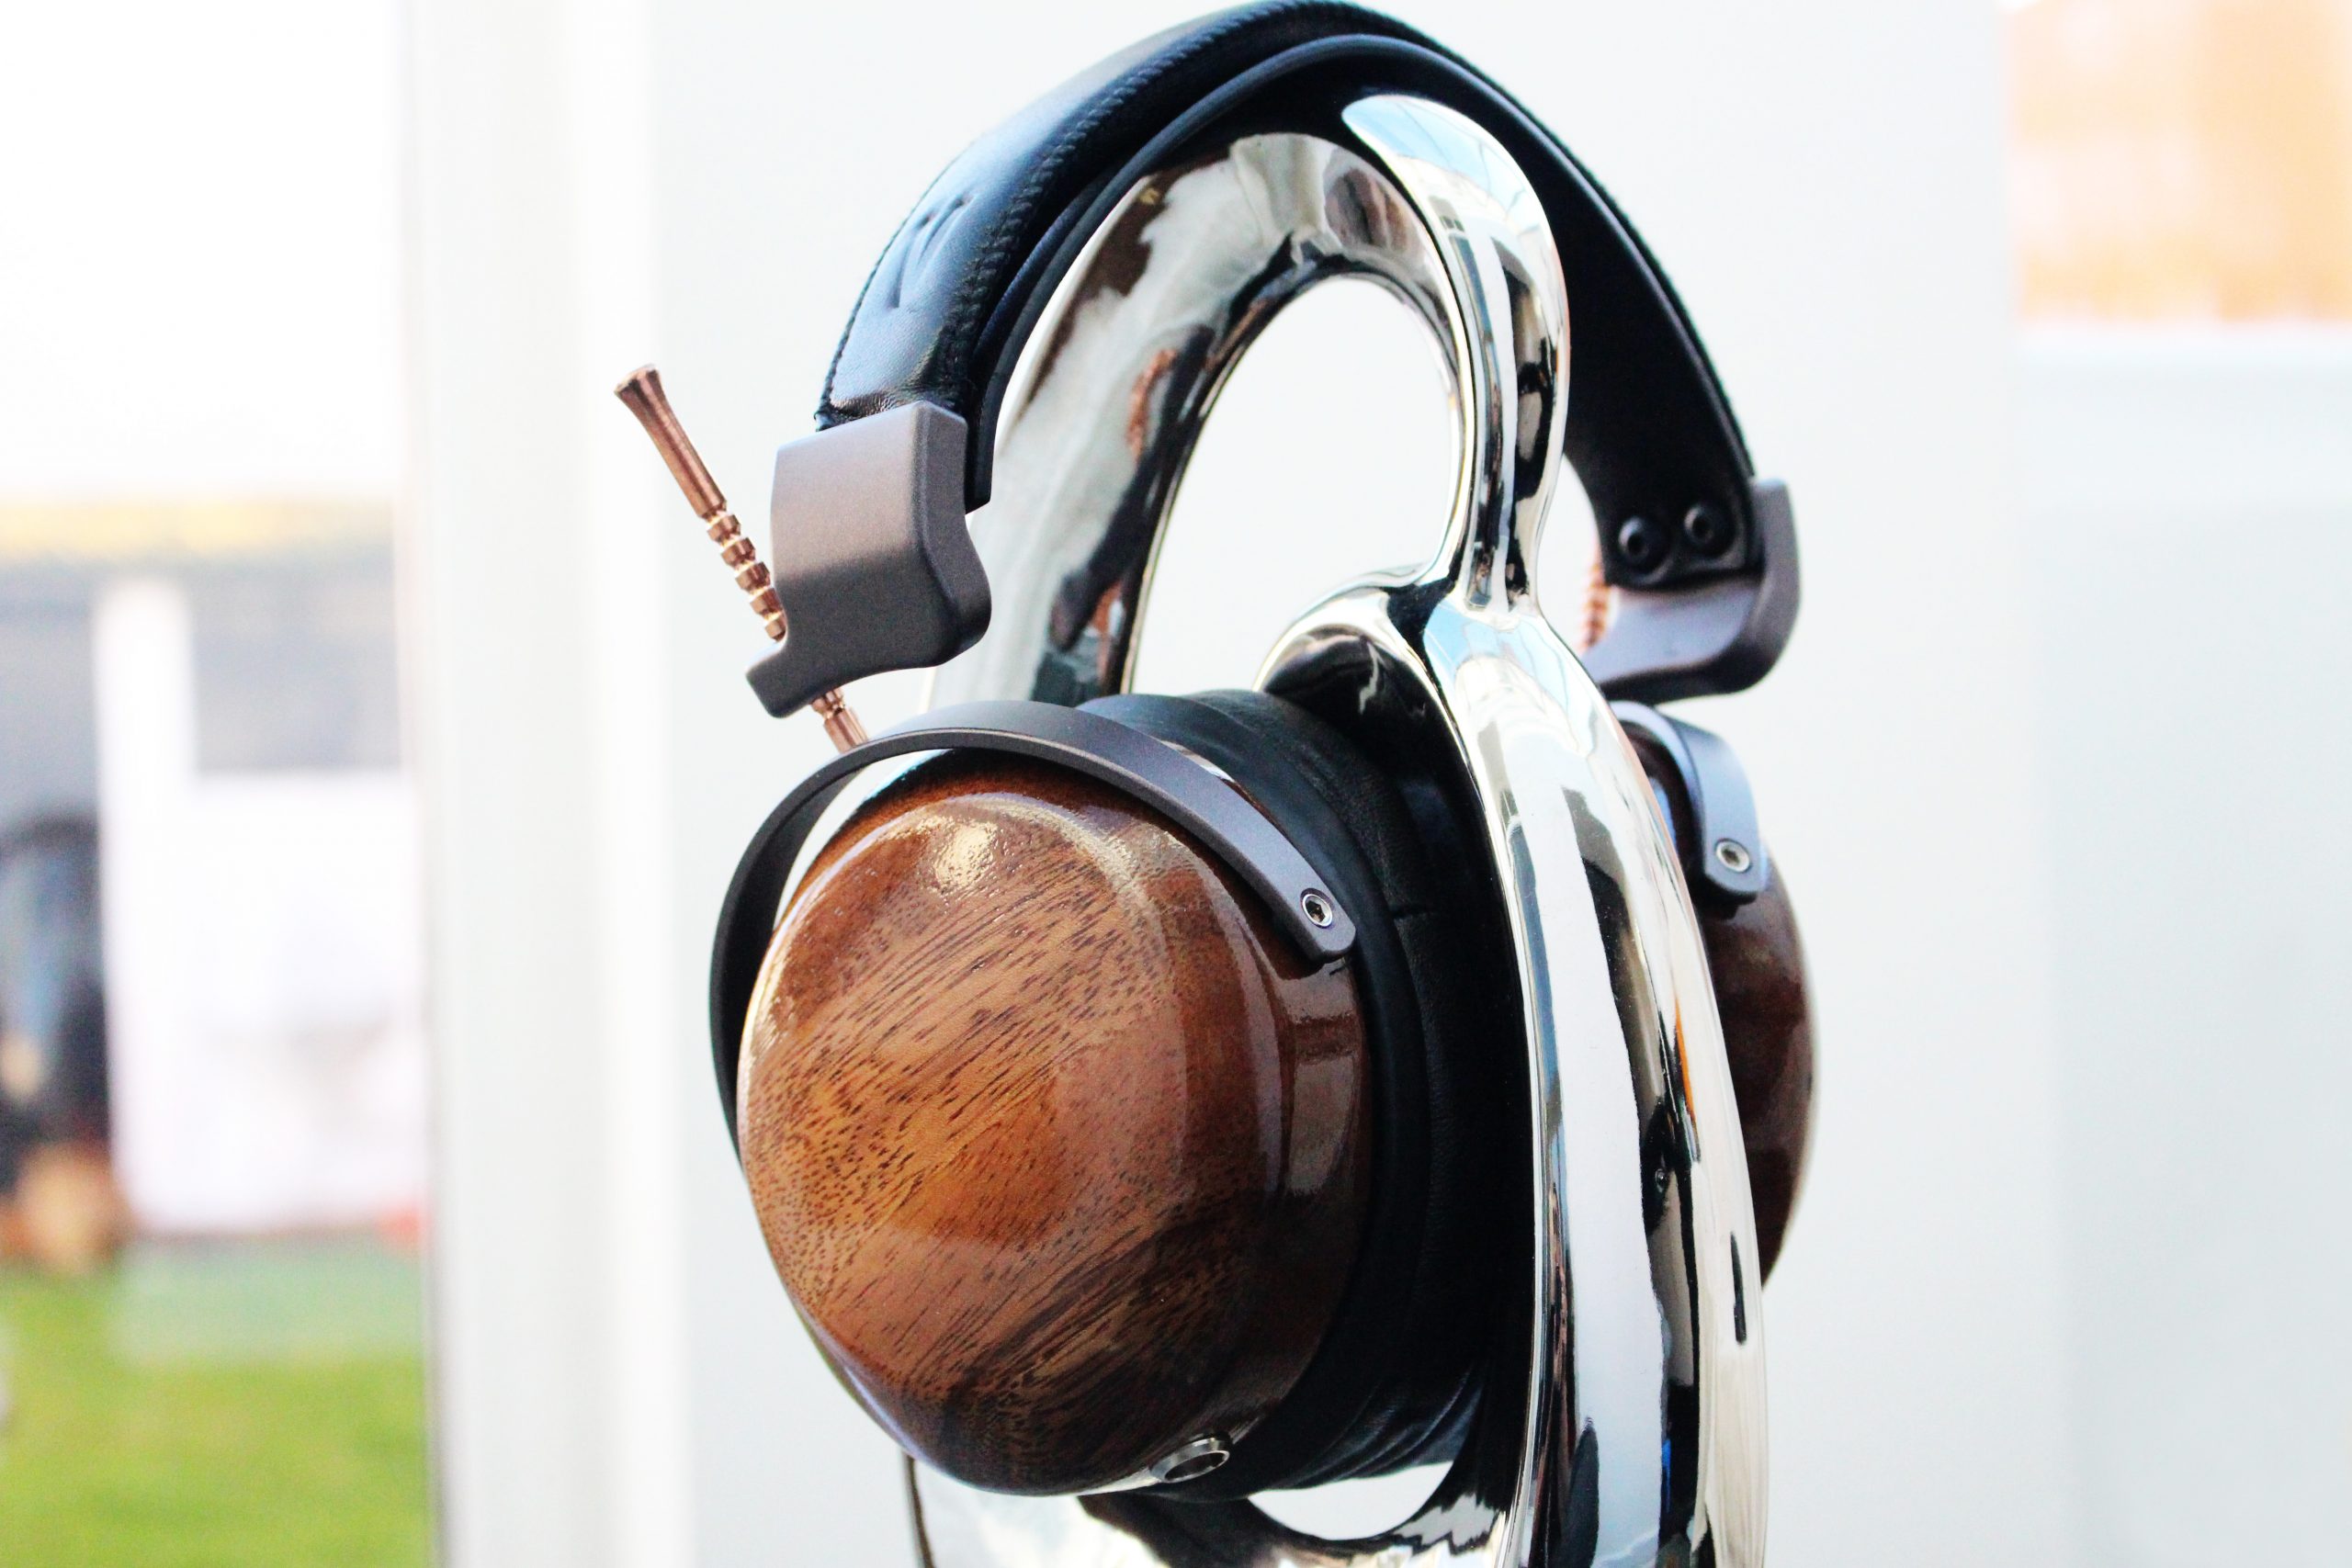 LOUIS VUITTON HEADPHONES  Headphone Reviews and Discussion 